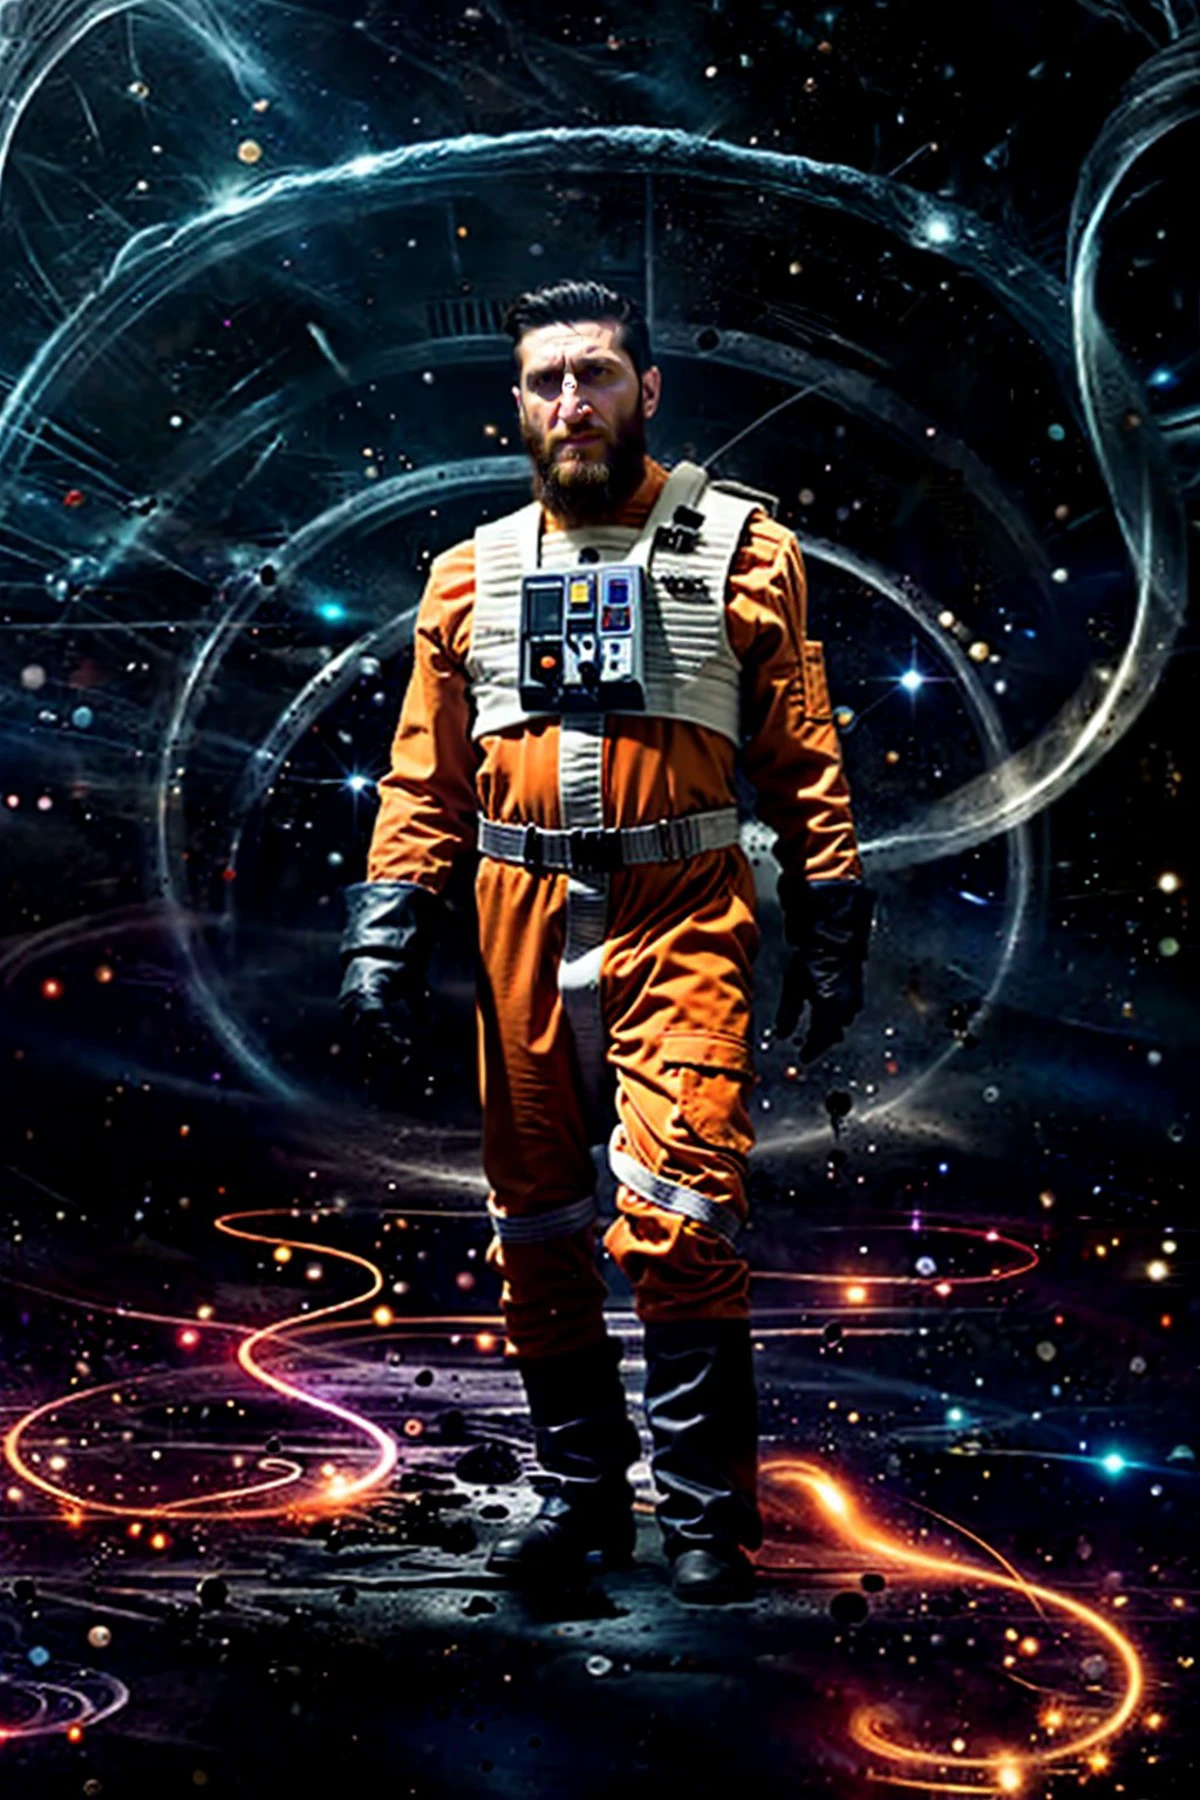 (Fares Fares:1.2) a man with a (slicked-back hair:1.3) wearing a (orange:0.2) (rebel pilot suit:1.2), dark space, bright stars, (full:1.2) (long:0.5) (squarish:1.2) big (beard:1.2), devilish (confident looking down:1.2), (a  circle of swirling psionicmagic, psychic energy, mana flow, shimmers, magic filament thread:1.1) is around his body, 4k uhd, dslr, soft light, high quality, Fujifilm XT3  